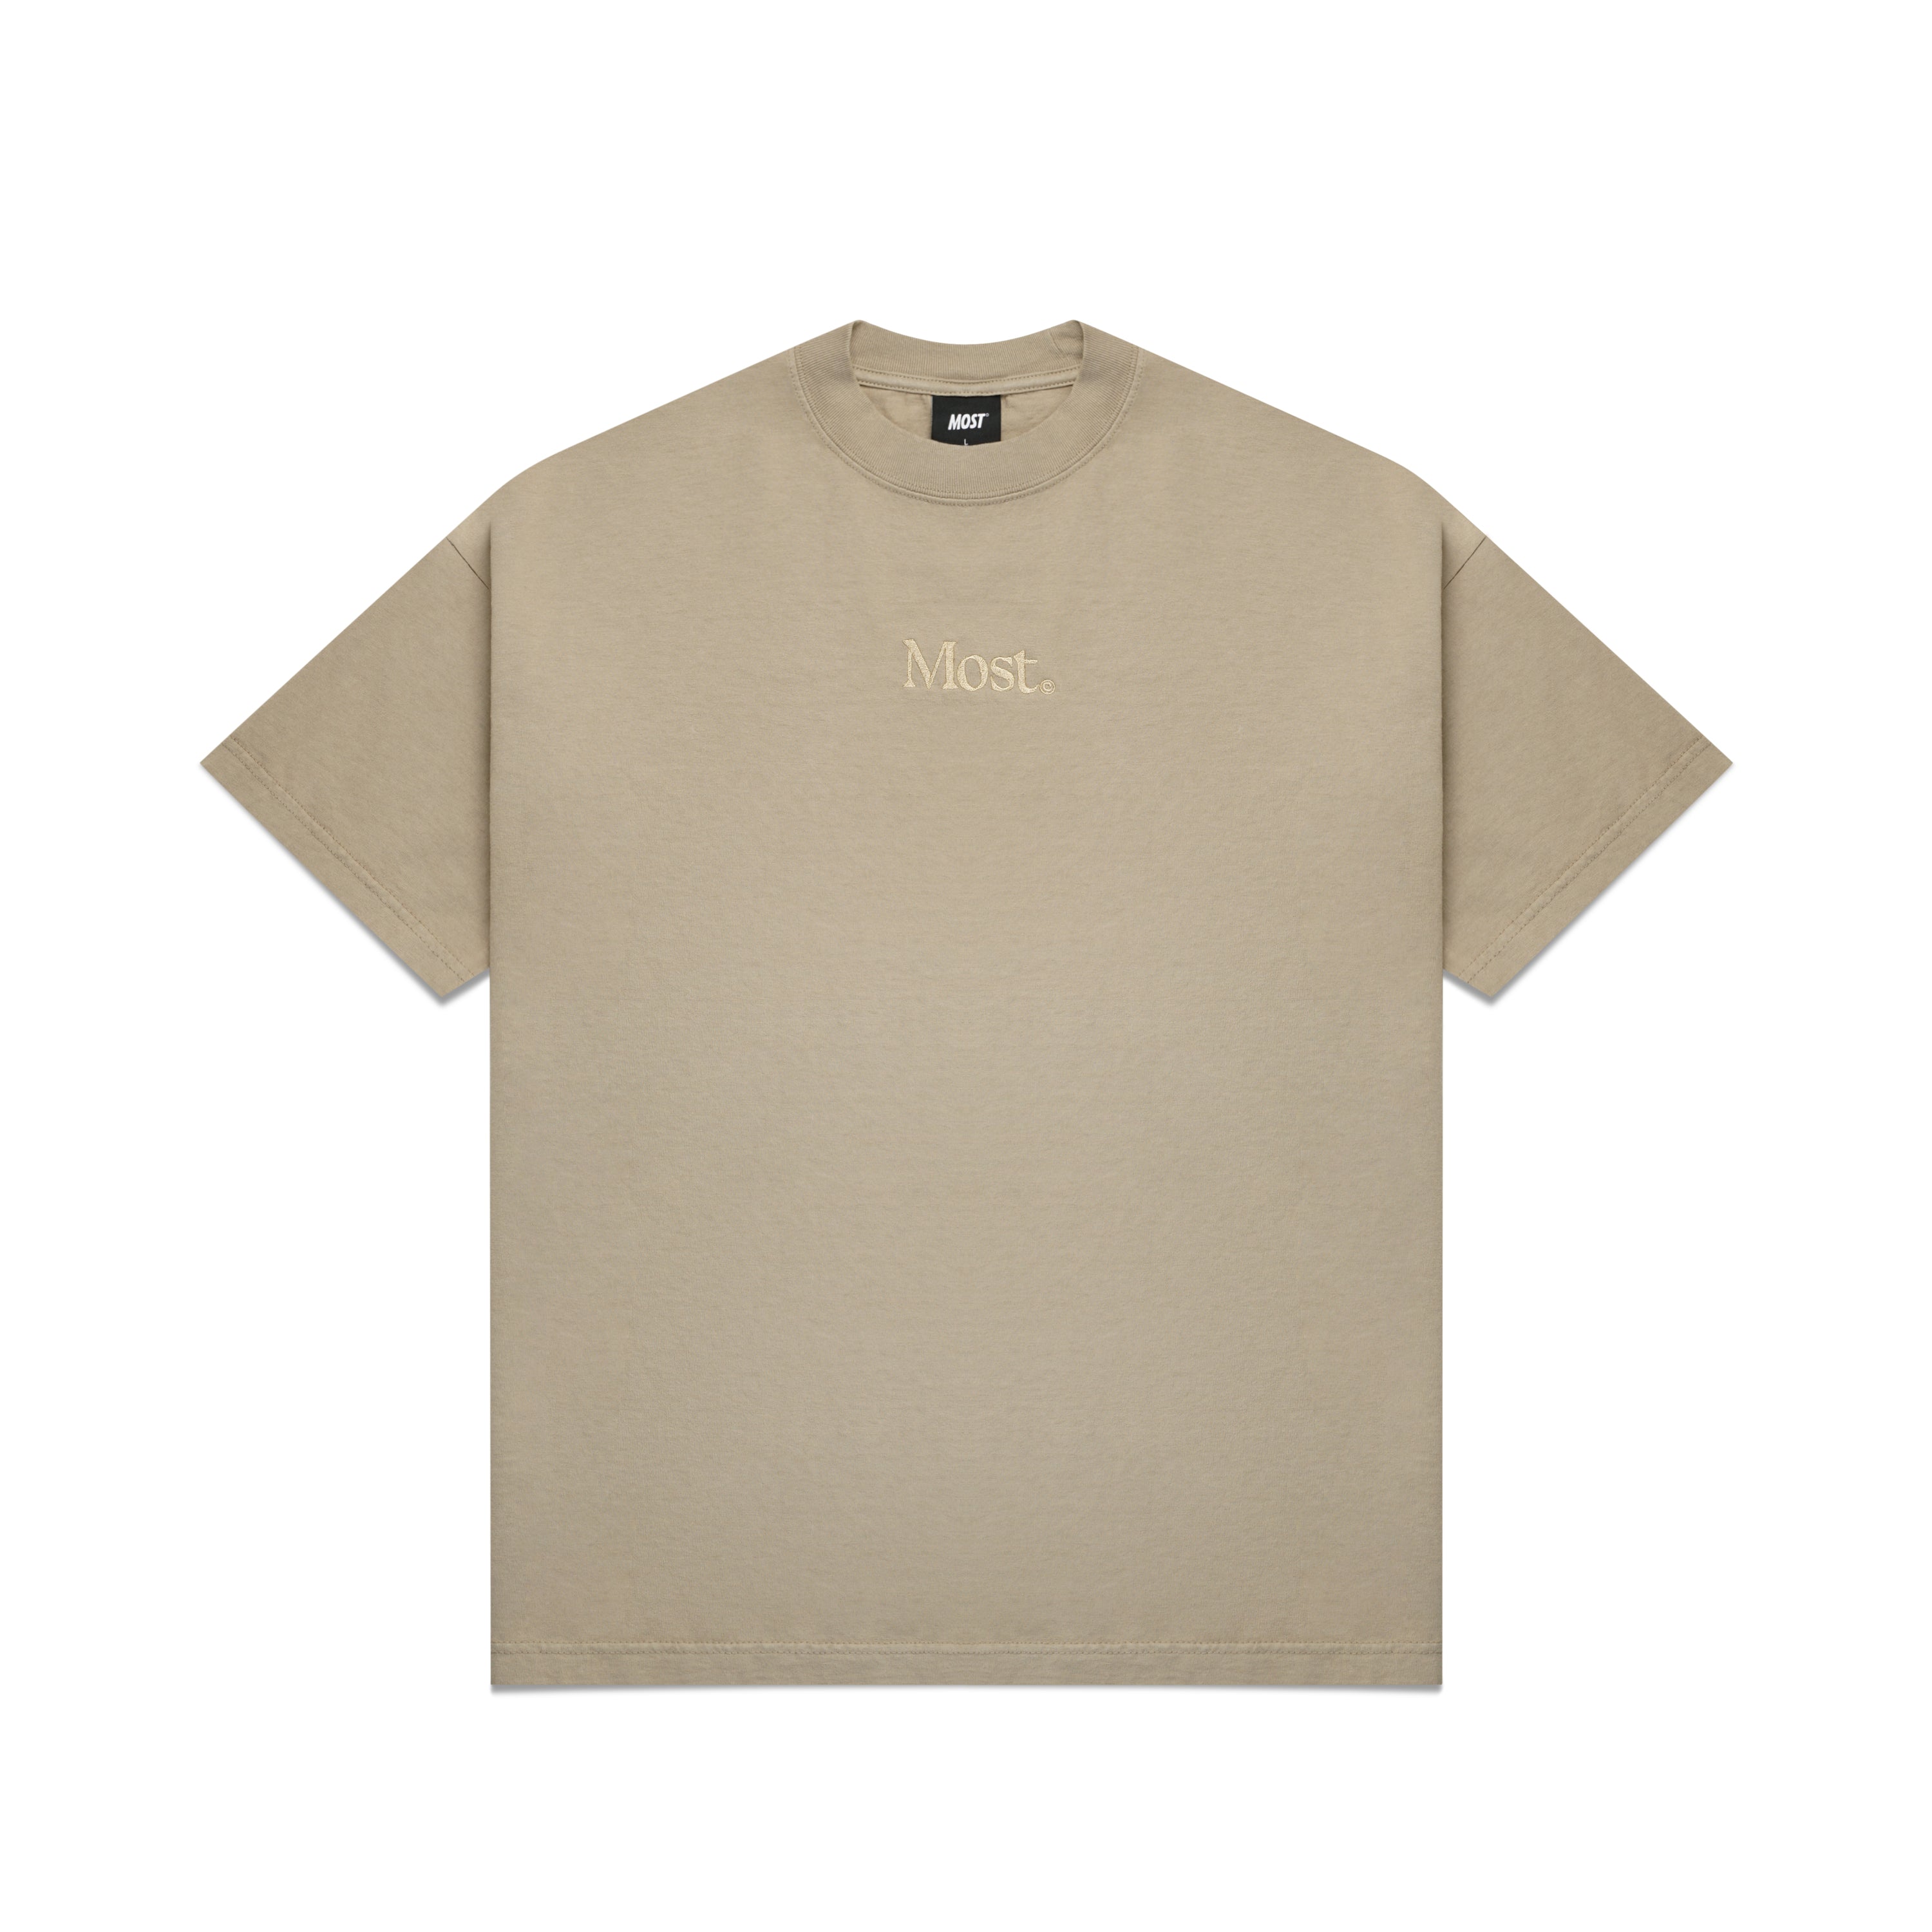 Embroidered Oversized Heavy Tee - Tan